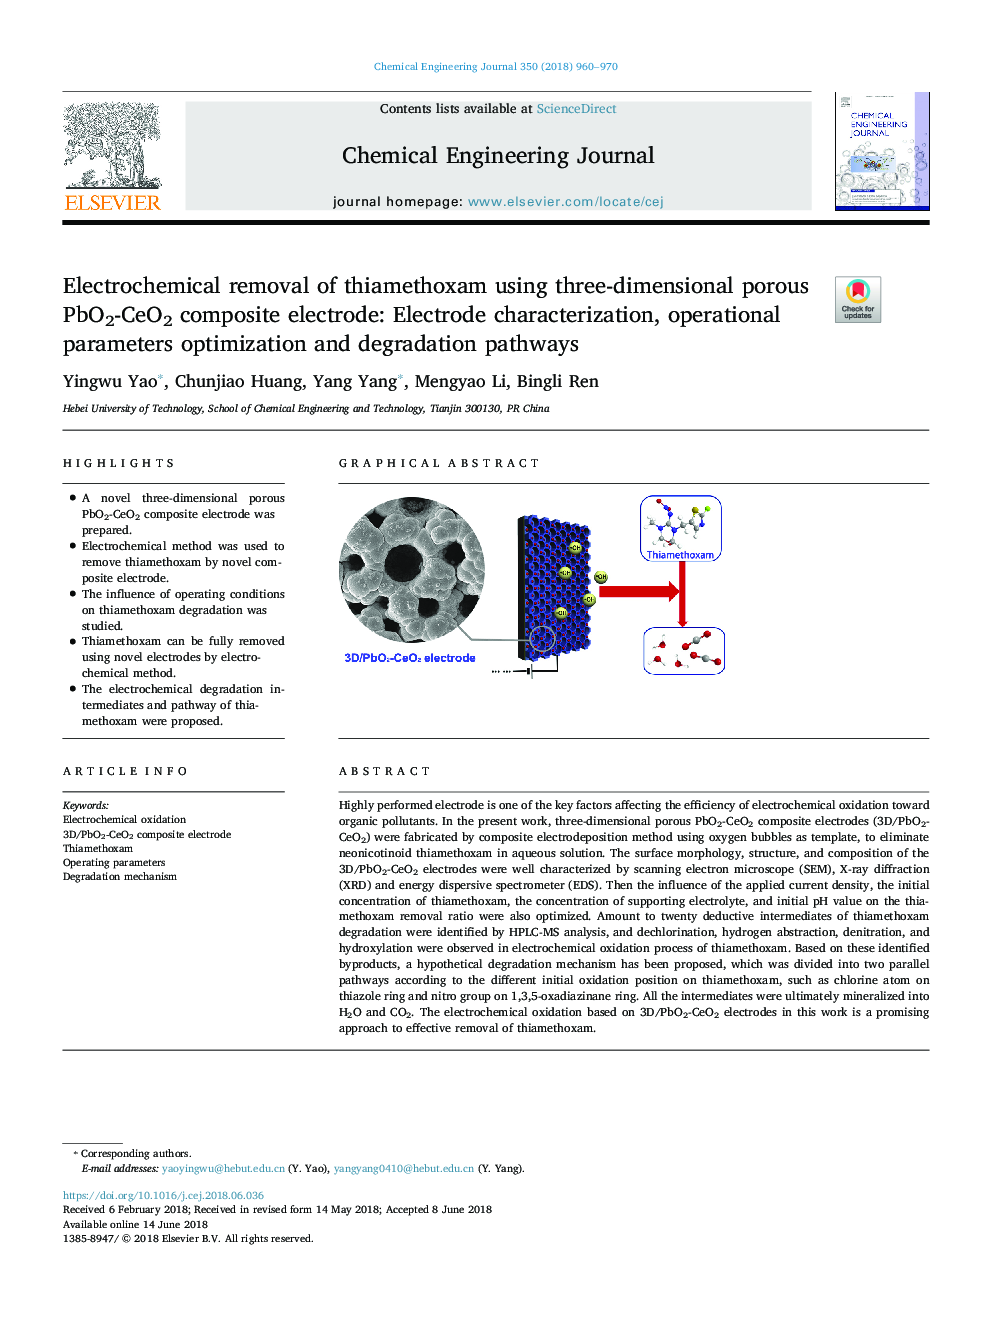 Electrochemical removal of thiamethoxam using three-dimensional porous PbO2-CeO2 composite electrode: Electrode characterization, operational parameters optimization and degradation pathways